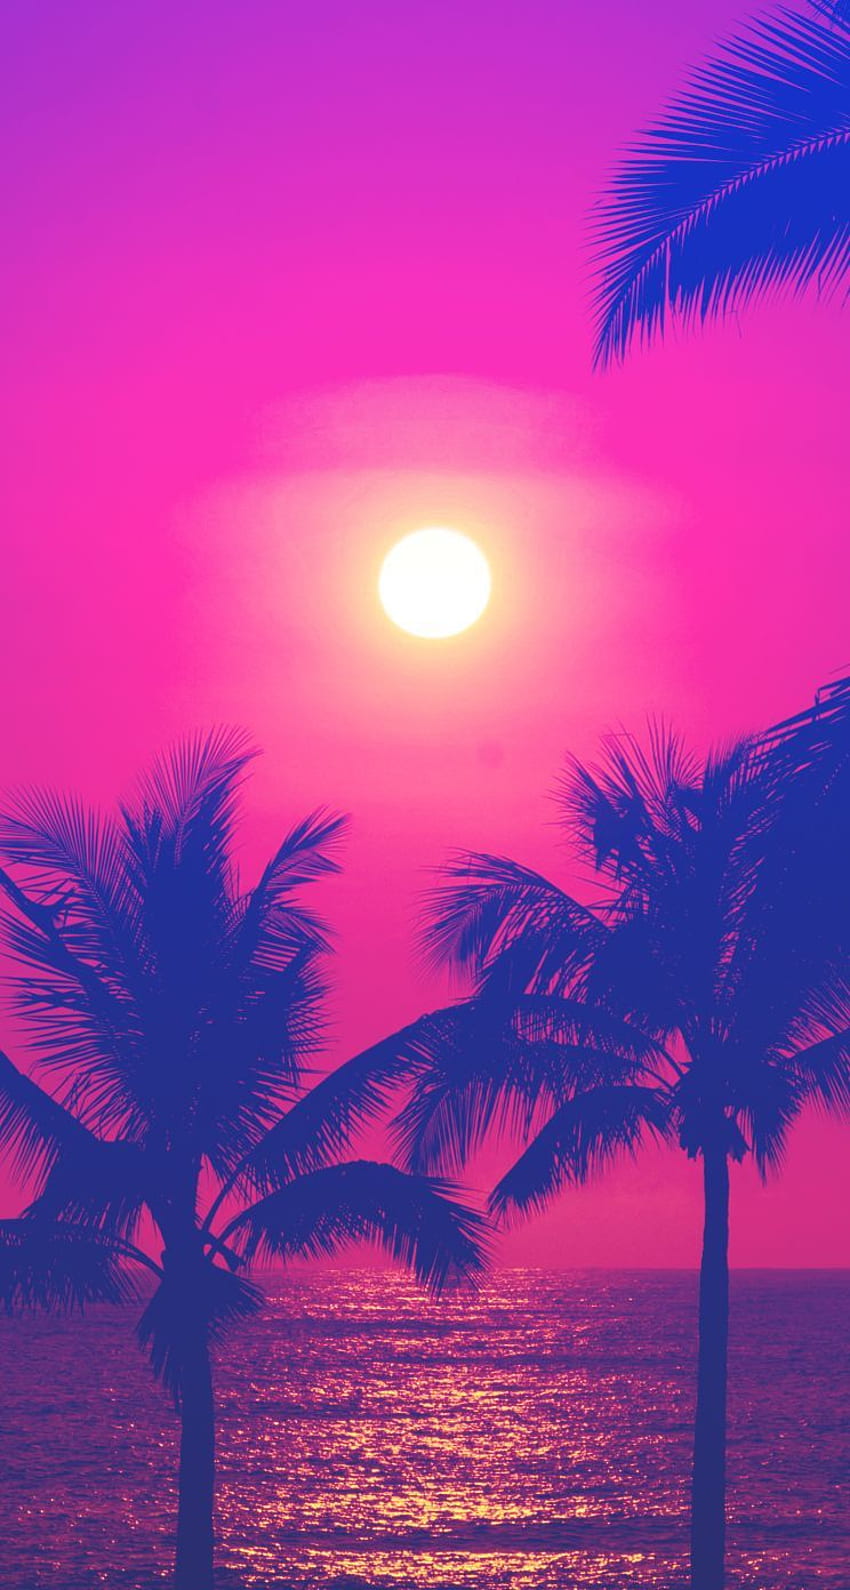 Neon / Hot pink blue sunset palms iphone phone background HD phone wallpaper